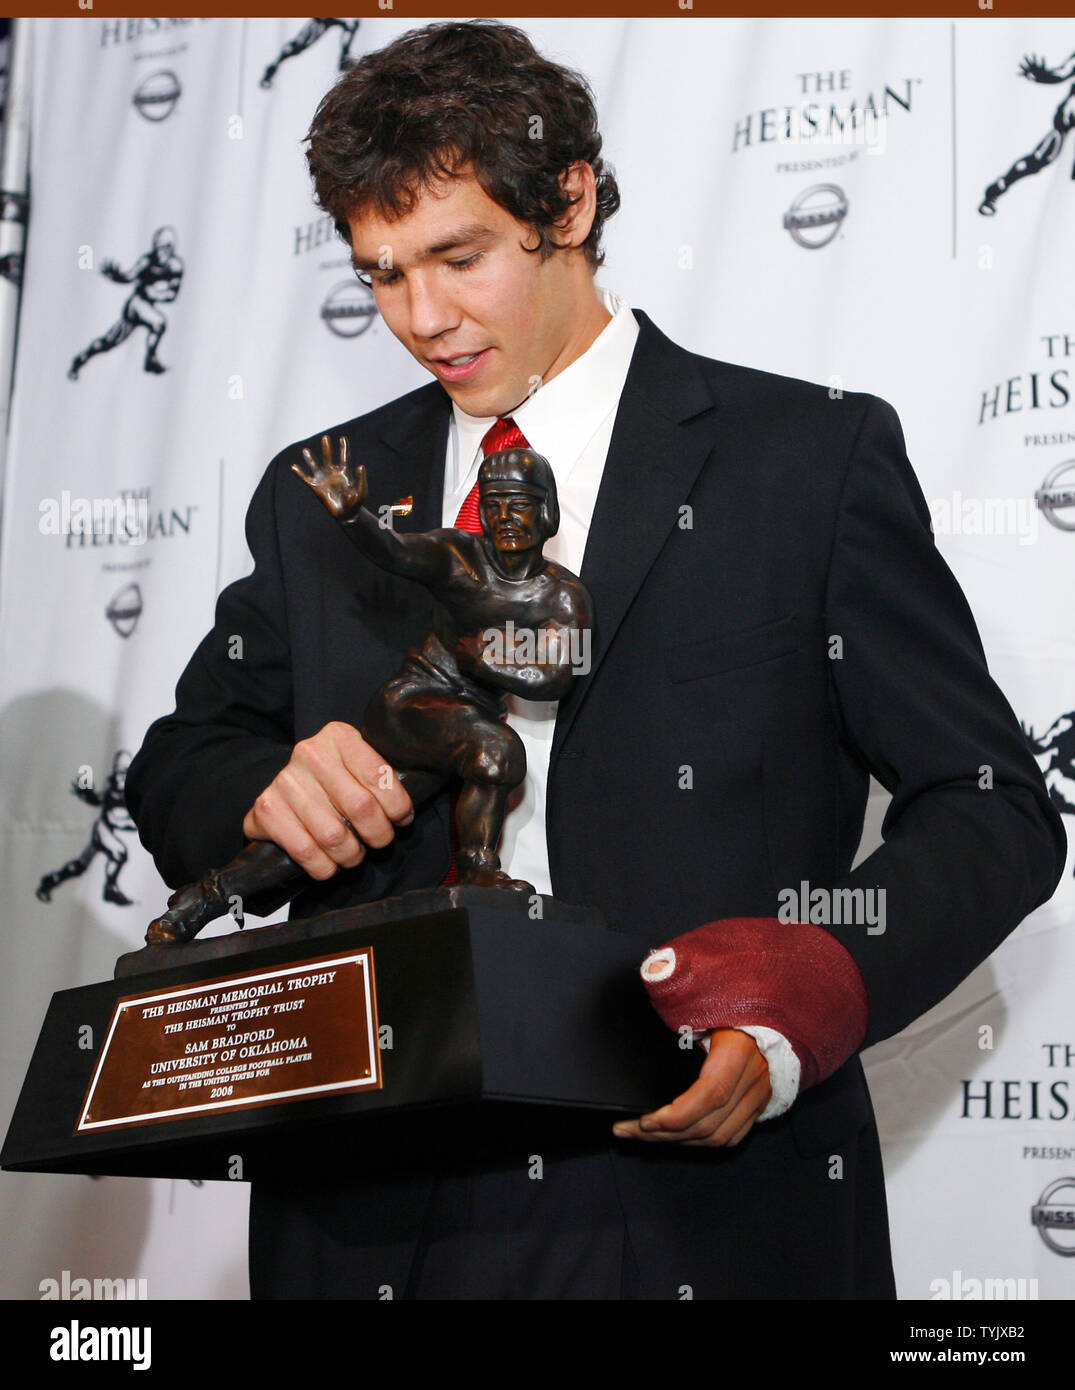 Sam Bradford of the University of Oklahoma holds the Heisman Trophy at the Sports Museum of America in New York City on December 13, 2008.                                        (UPI Photo/John Angelillo)   . Stock Photo